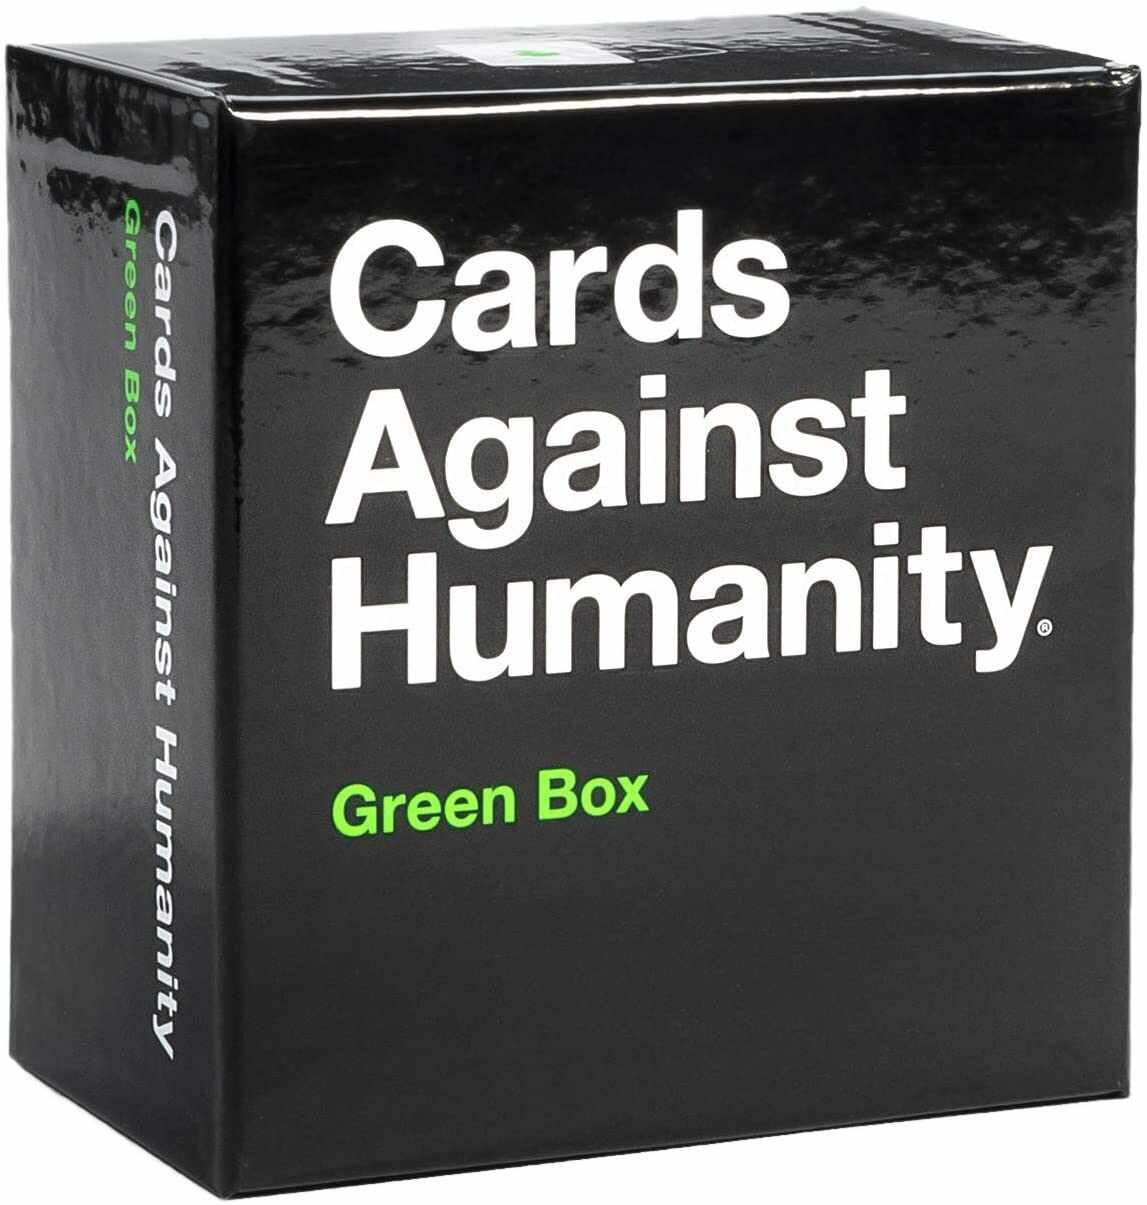 Extensie - Cards Against Humanity: Green Box - Lb. Engleza | Cards Against Humanity